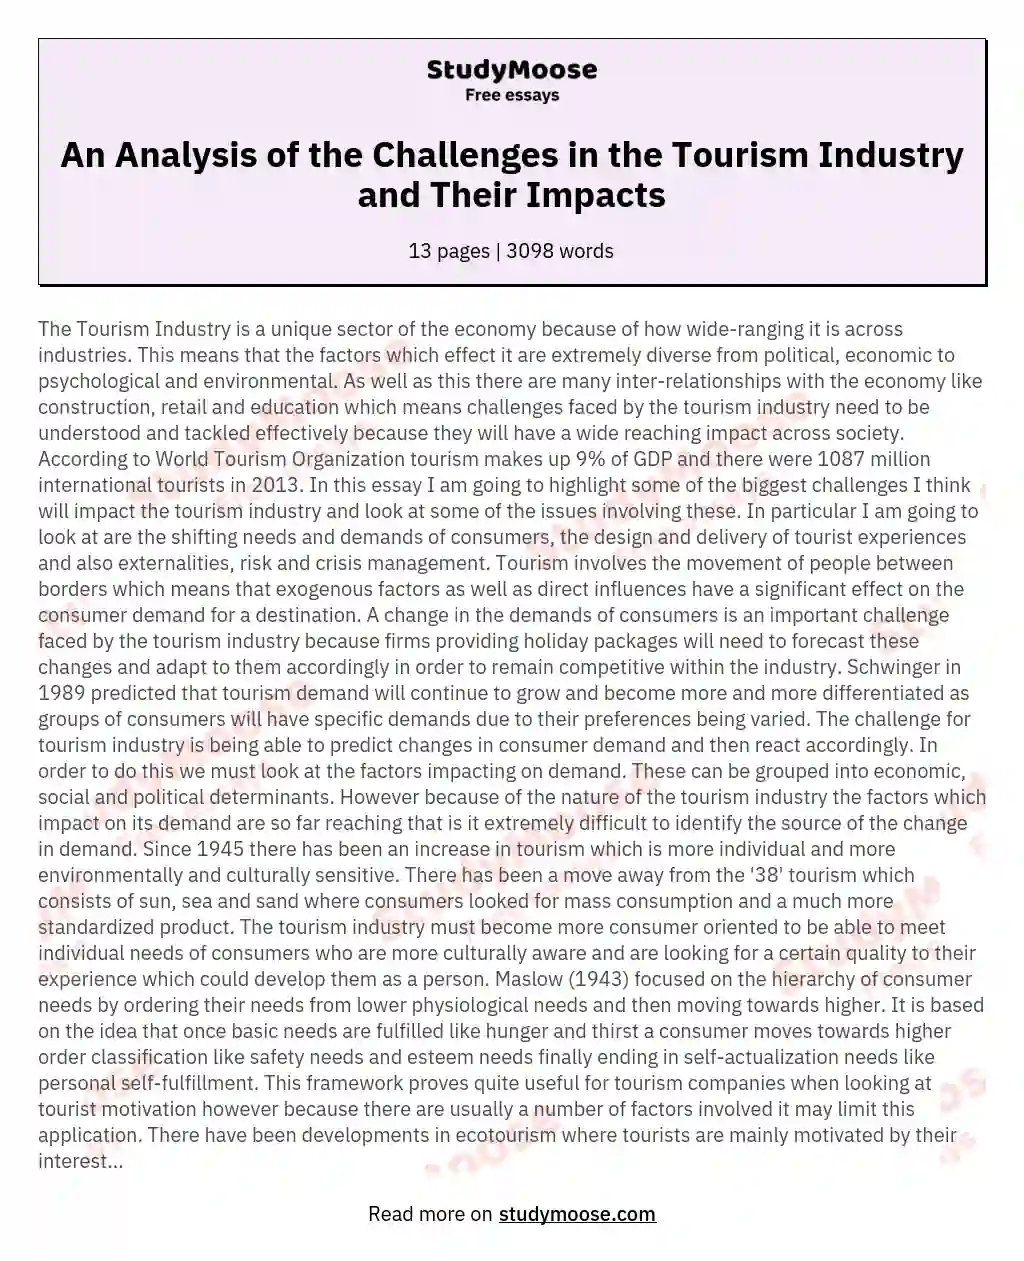 example of tourism industry essay